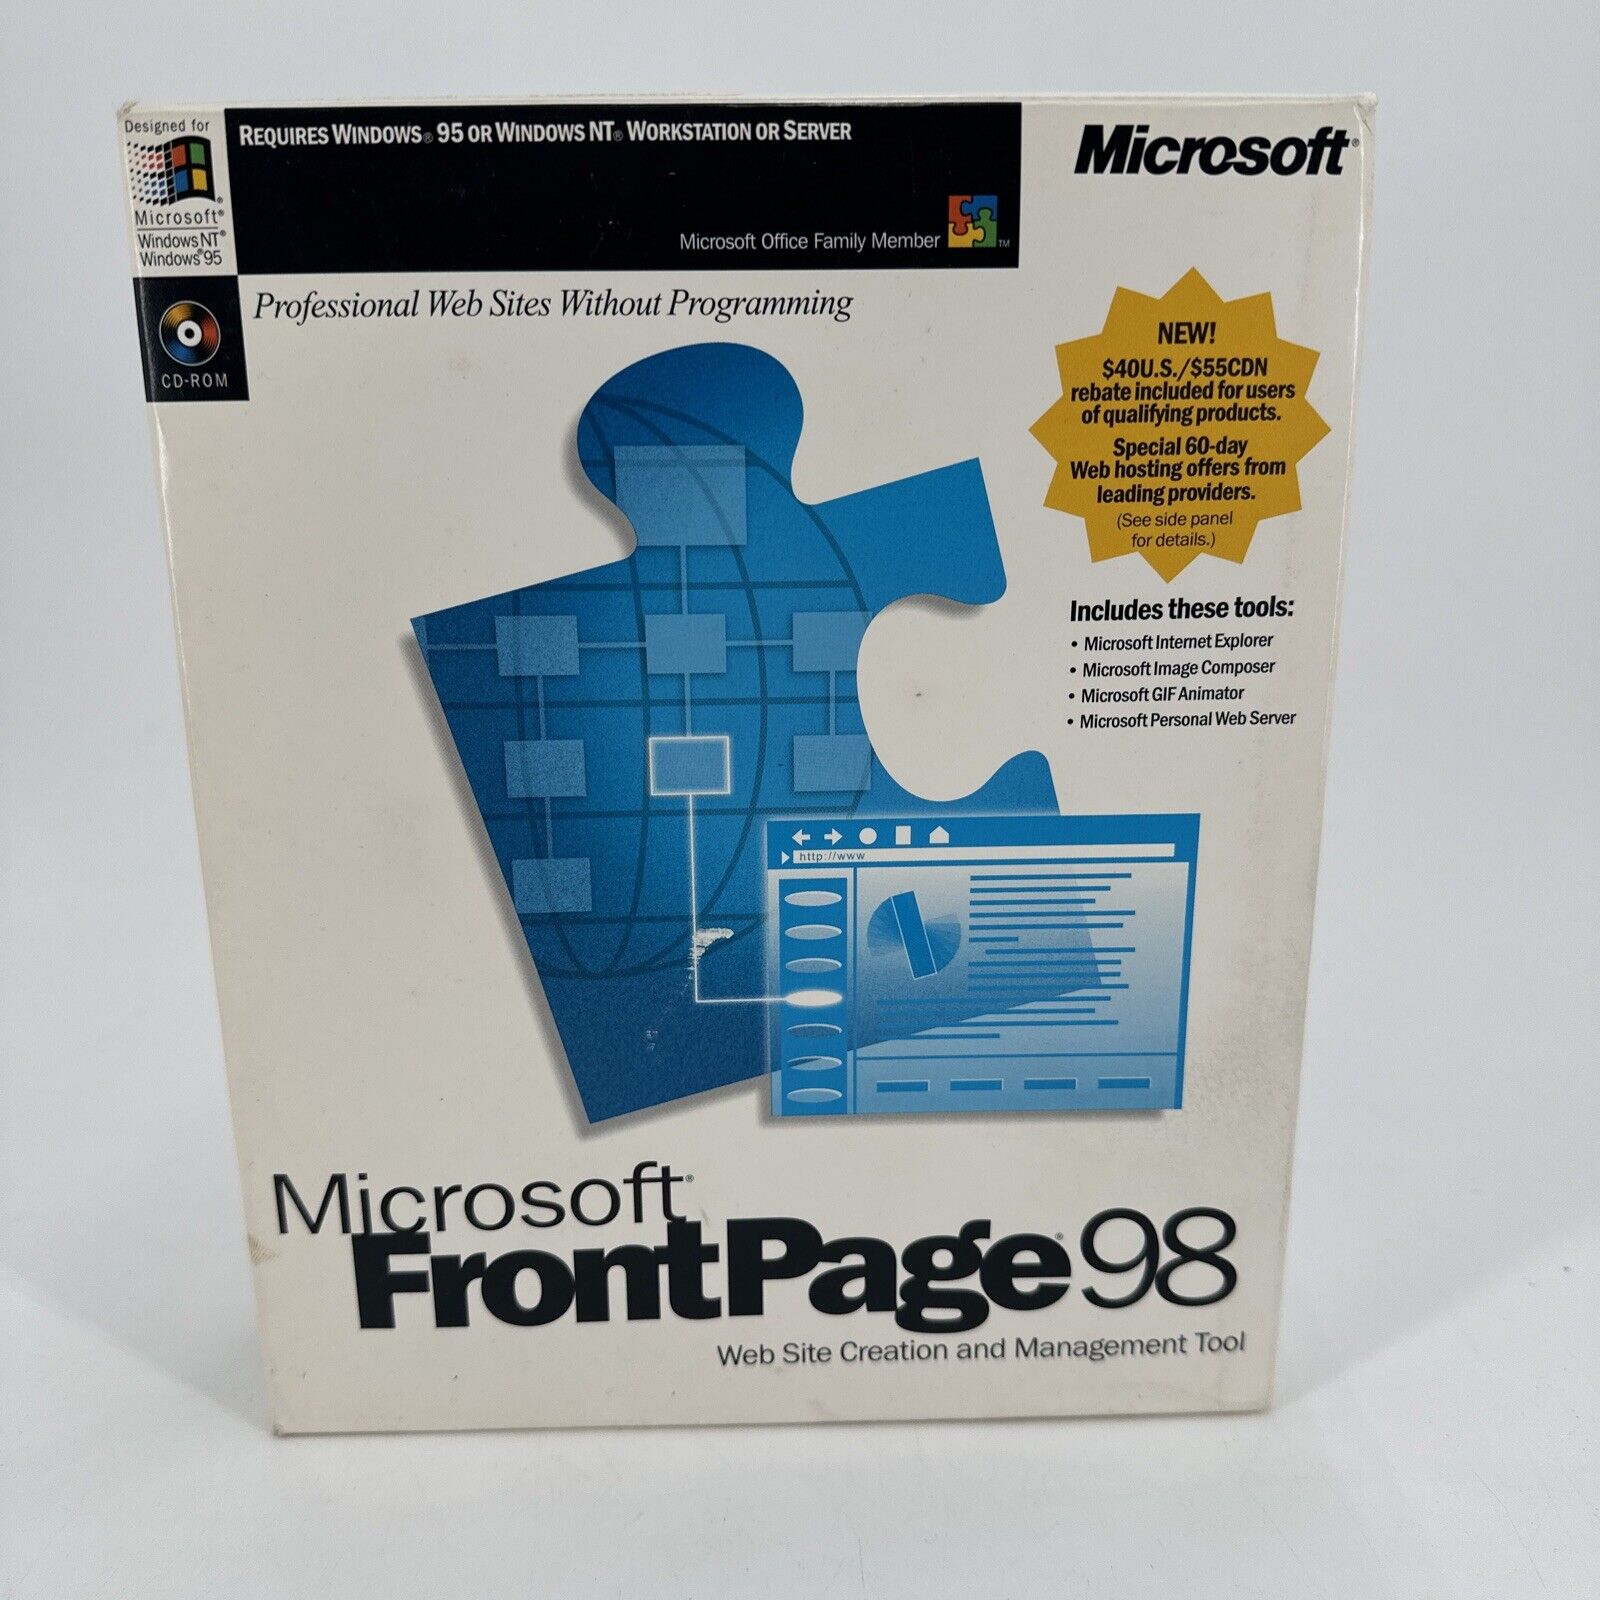 Microsoft FrontPage 98 Windows. Big Box. Website Creation And Management Tool